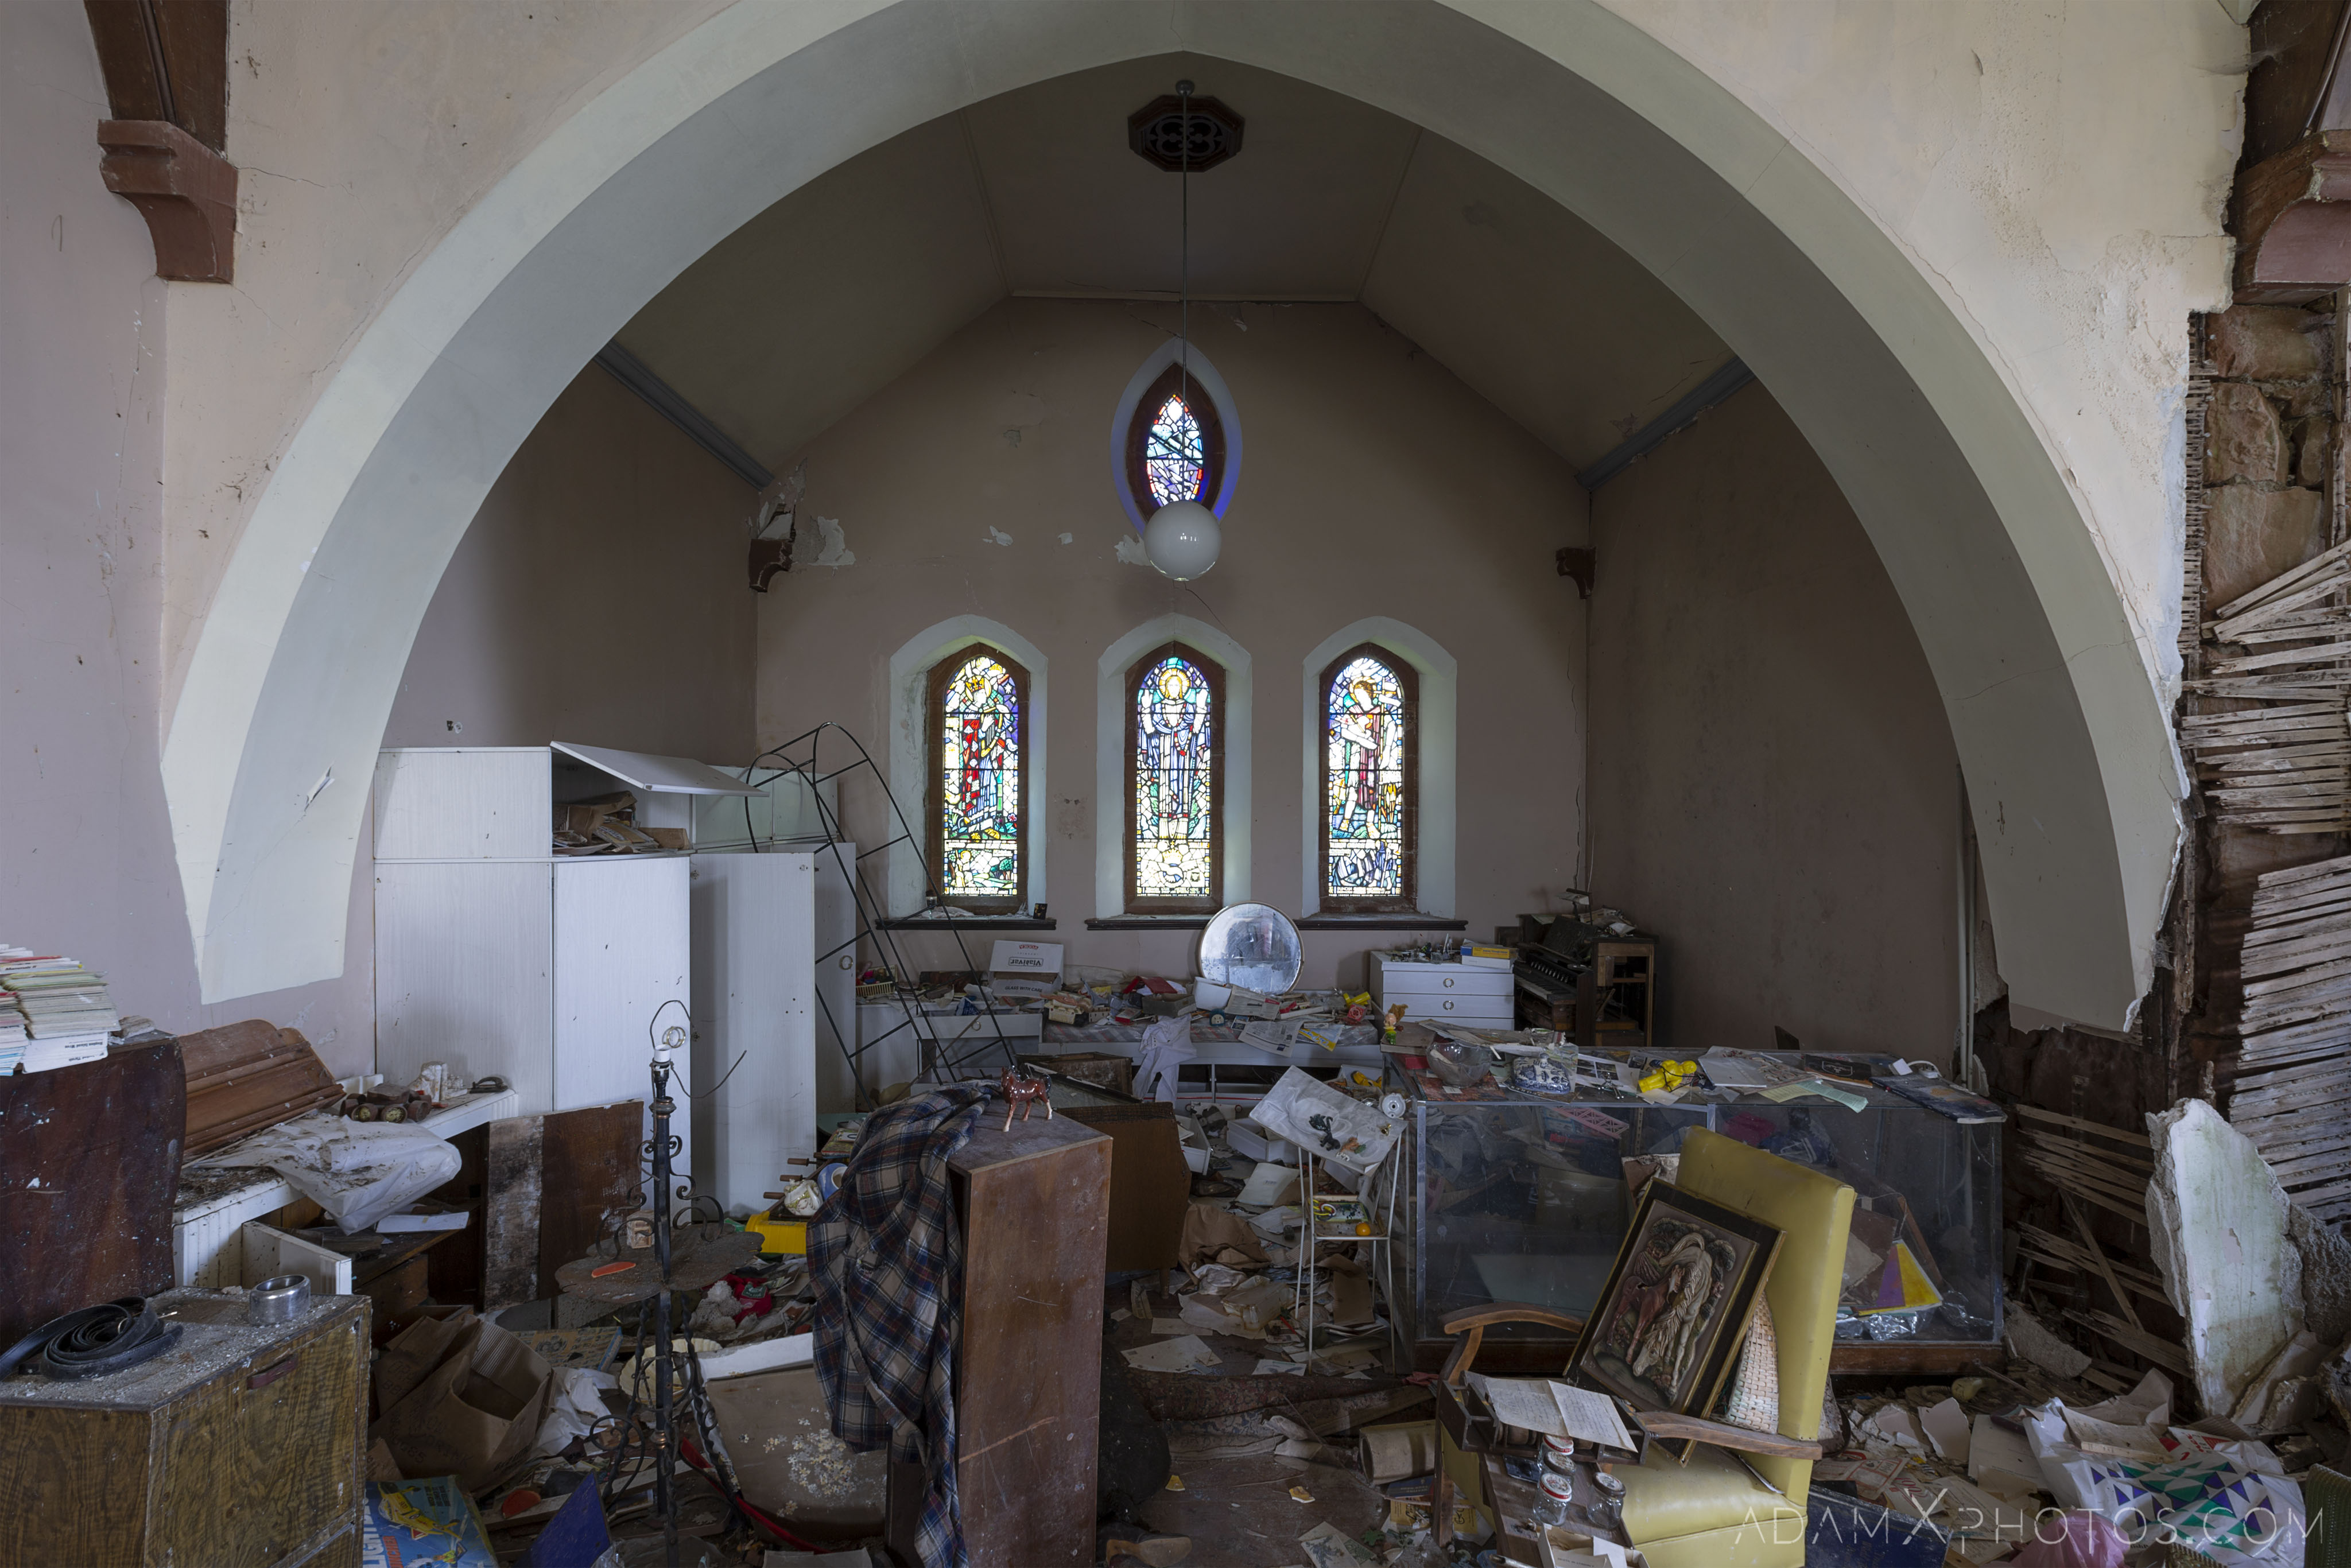 back of hall soft toys ornaments books stained glass windows Elvanfoot Parish Church Hoarder Hoarders Church Adam X Urbex Urban Exploration Access 2018 Abandoned decay lost forgotten derelict location creepy haunting eerie